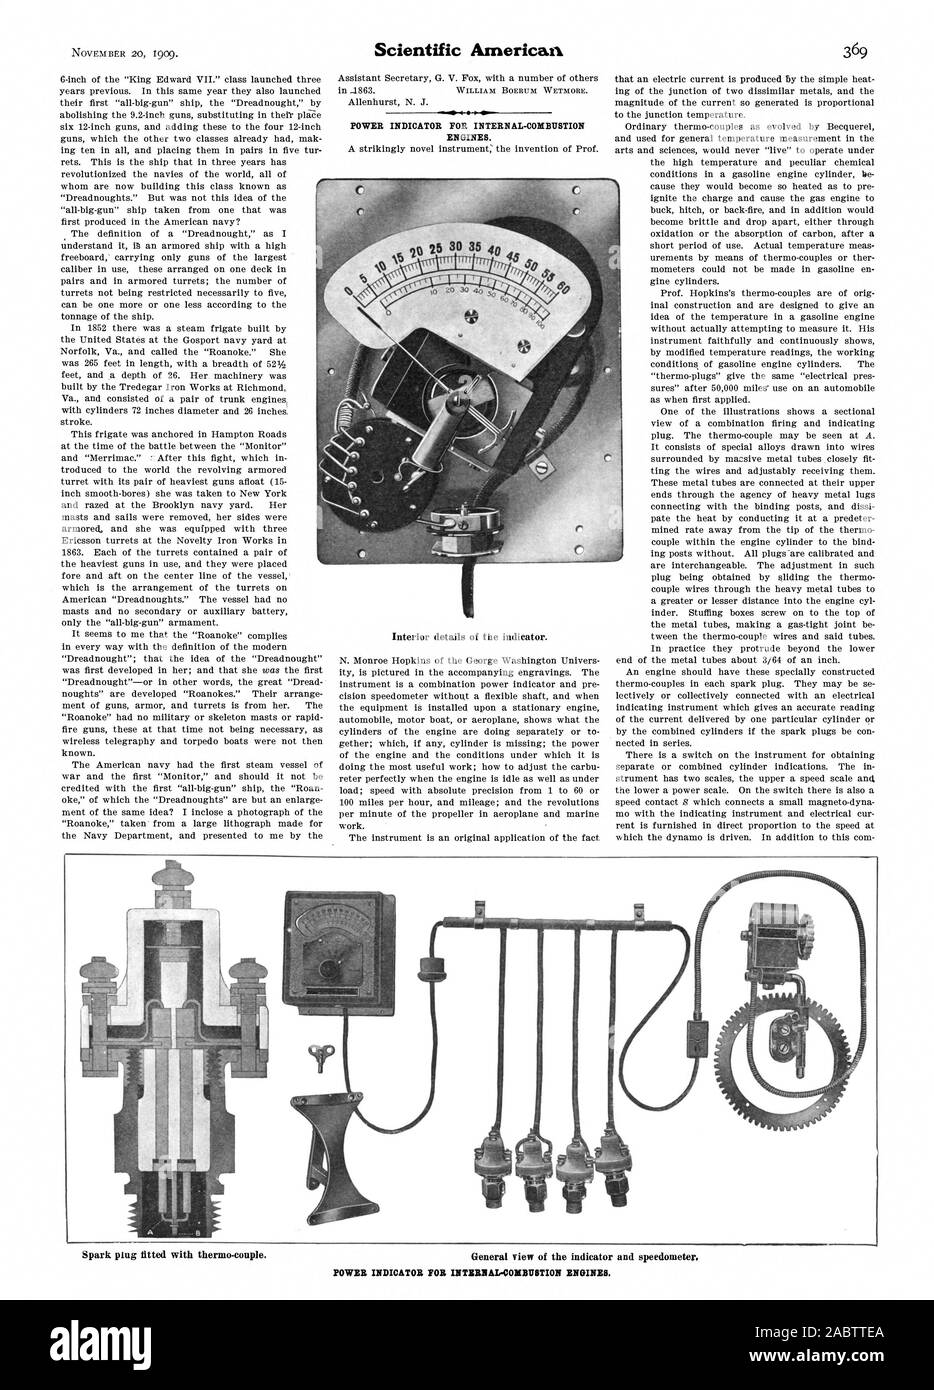 POWER INDICATOR FOR INTERNAL-COMBUSTION ENGINES. POWER INDICATOR FOR INTRINAL-COSIBIISTION ENGINES., scientific american, -1909-11-20 Stock Photo